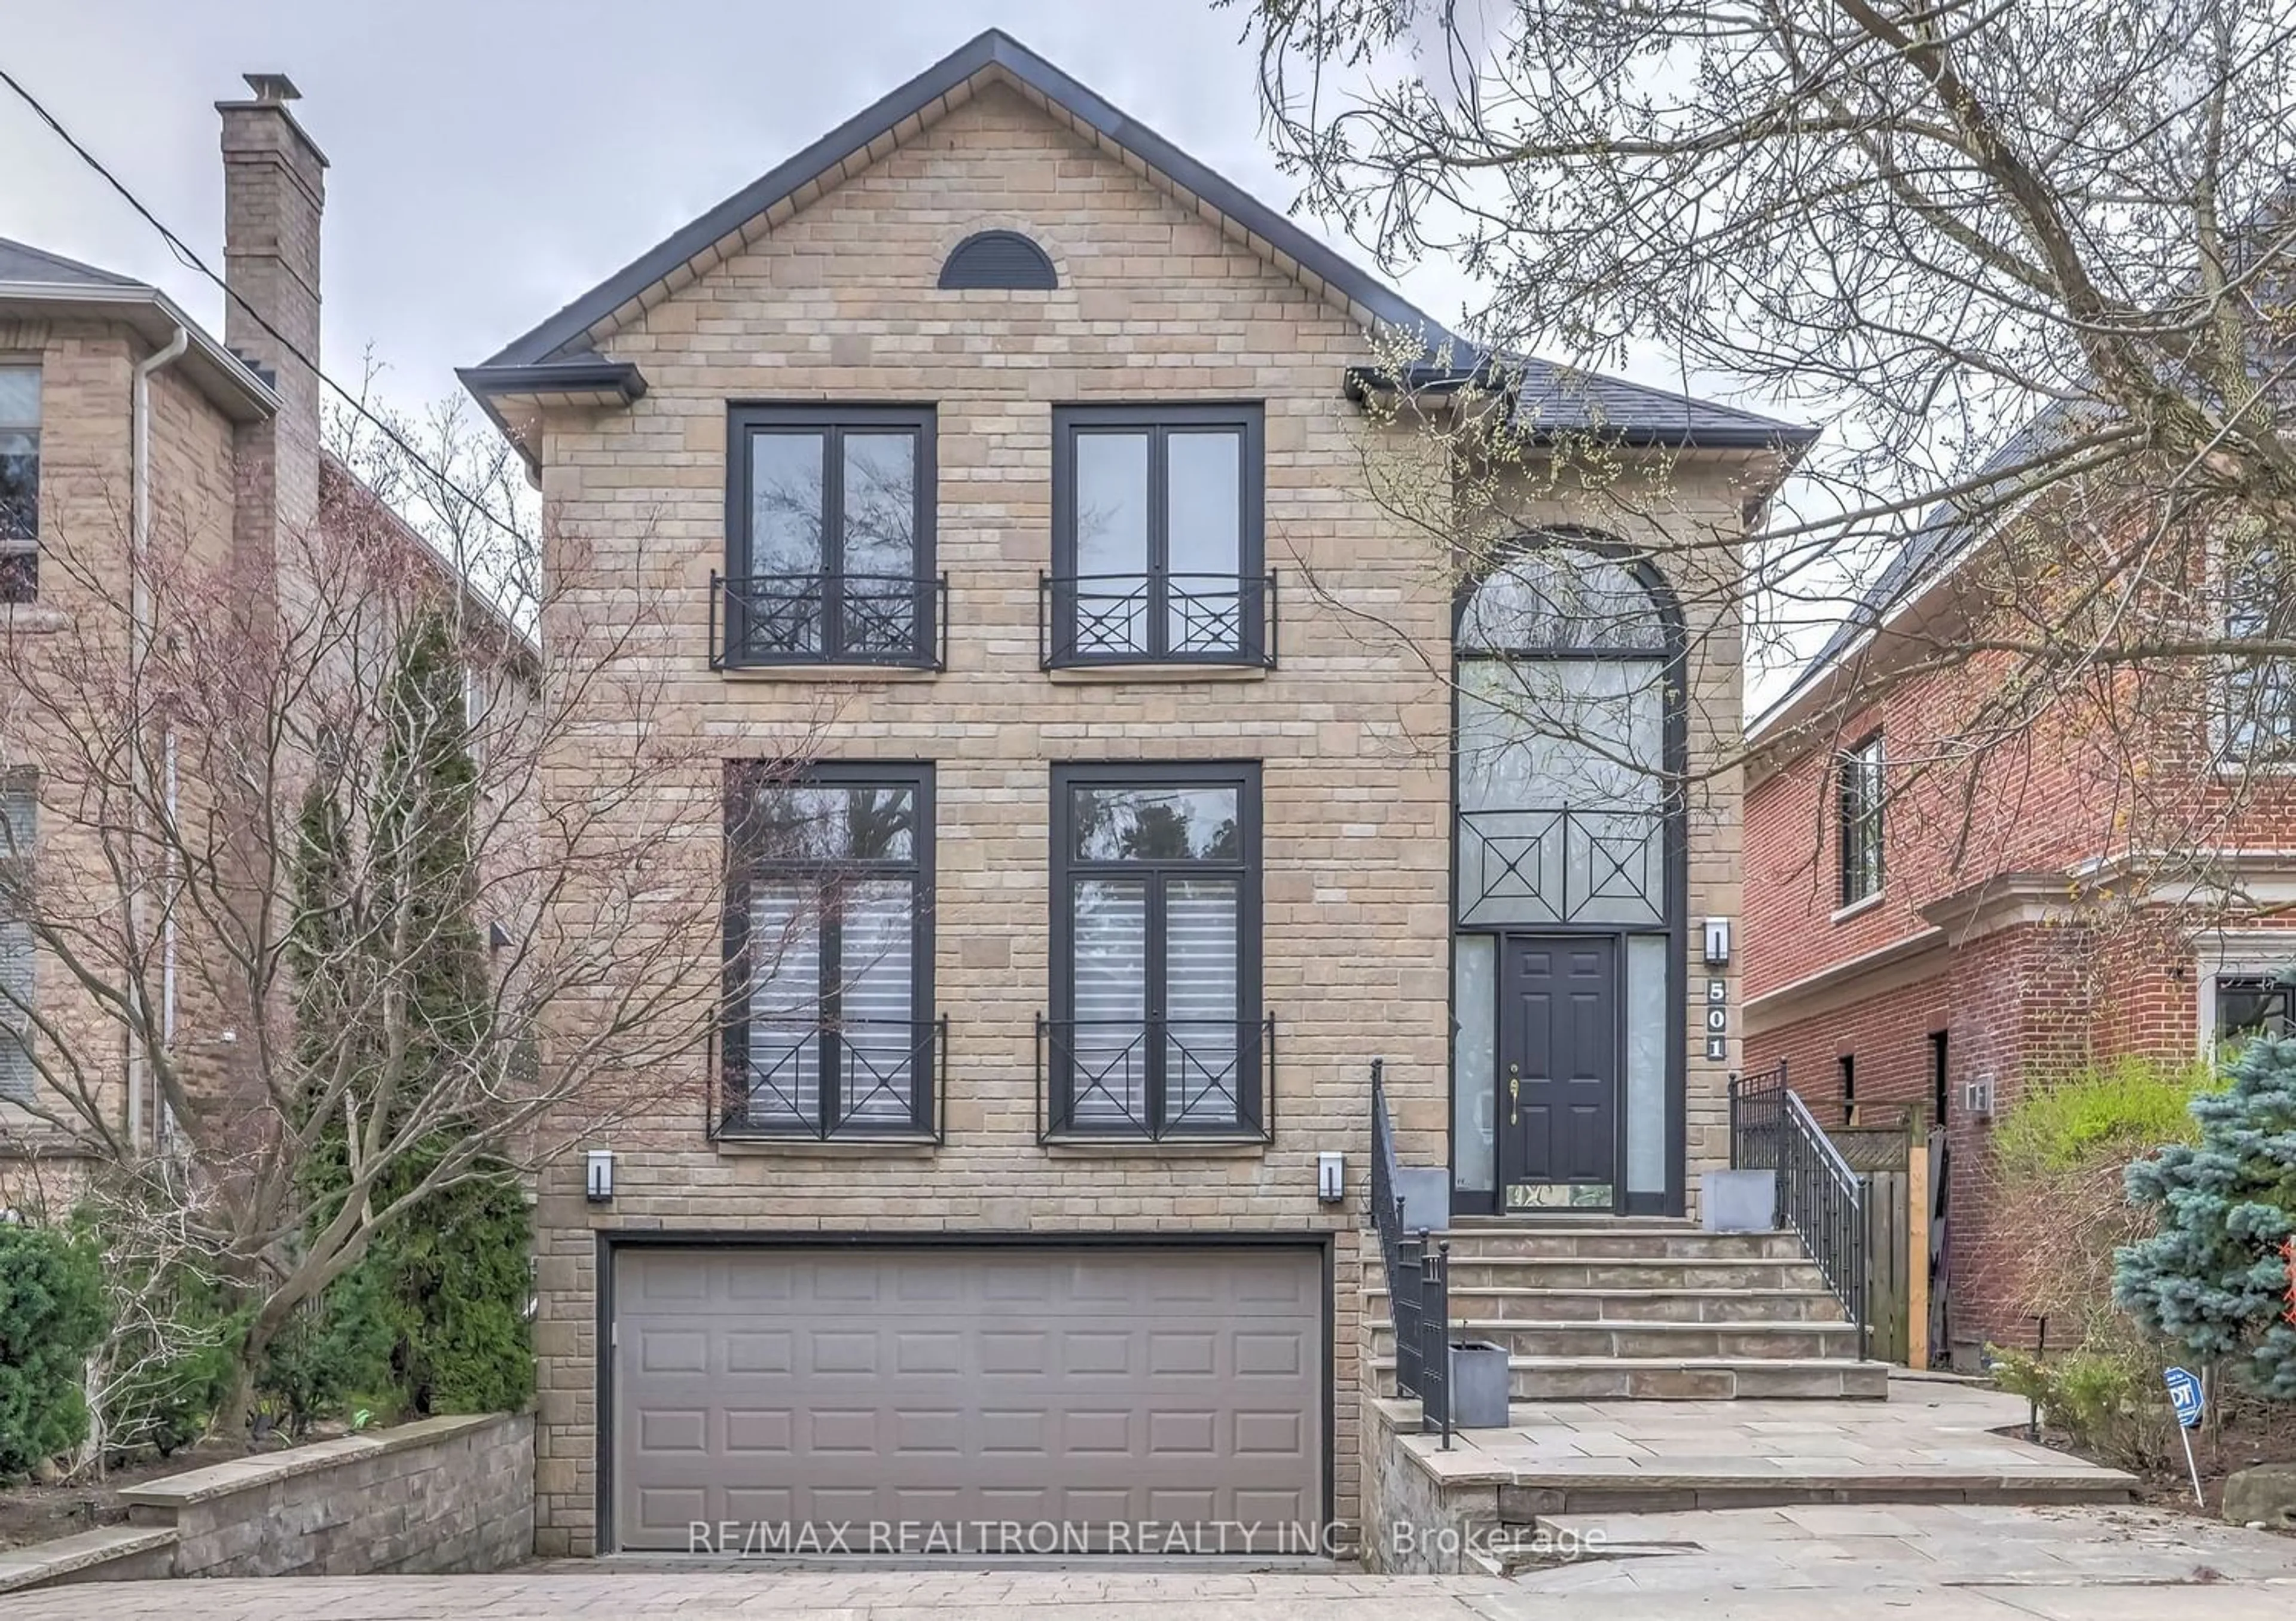 Home with brick exterior material for 501 Fairlawn Ave, Toronto Ontario M5M 1V3